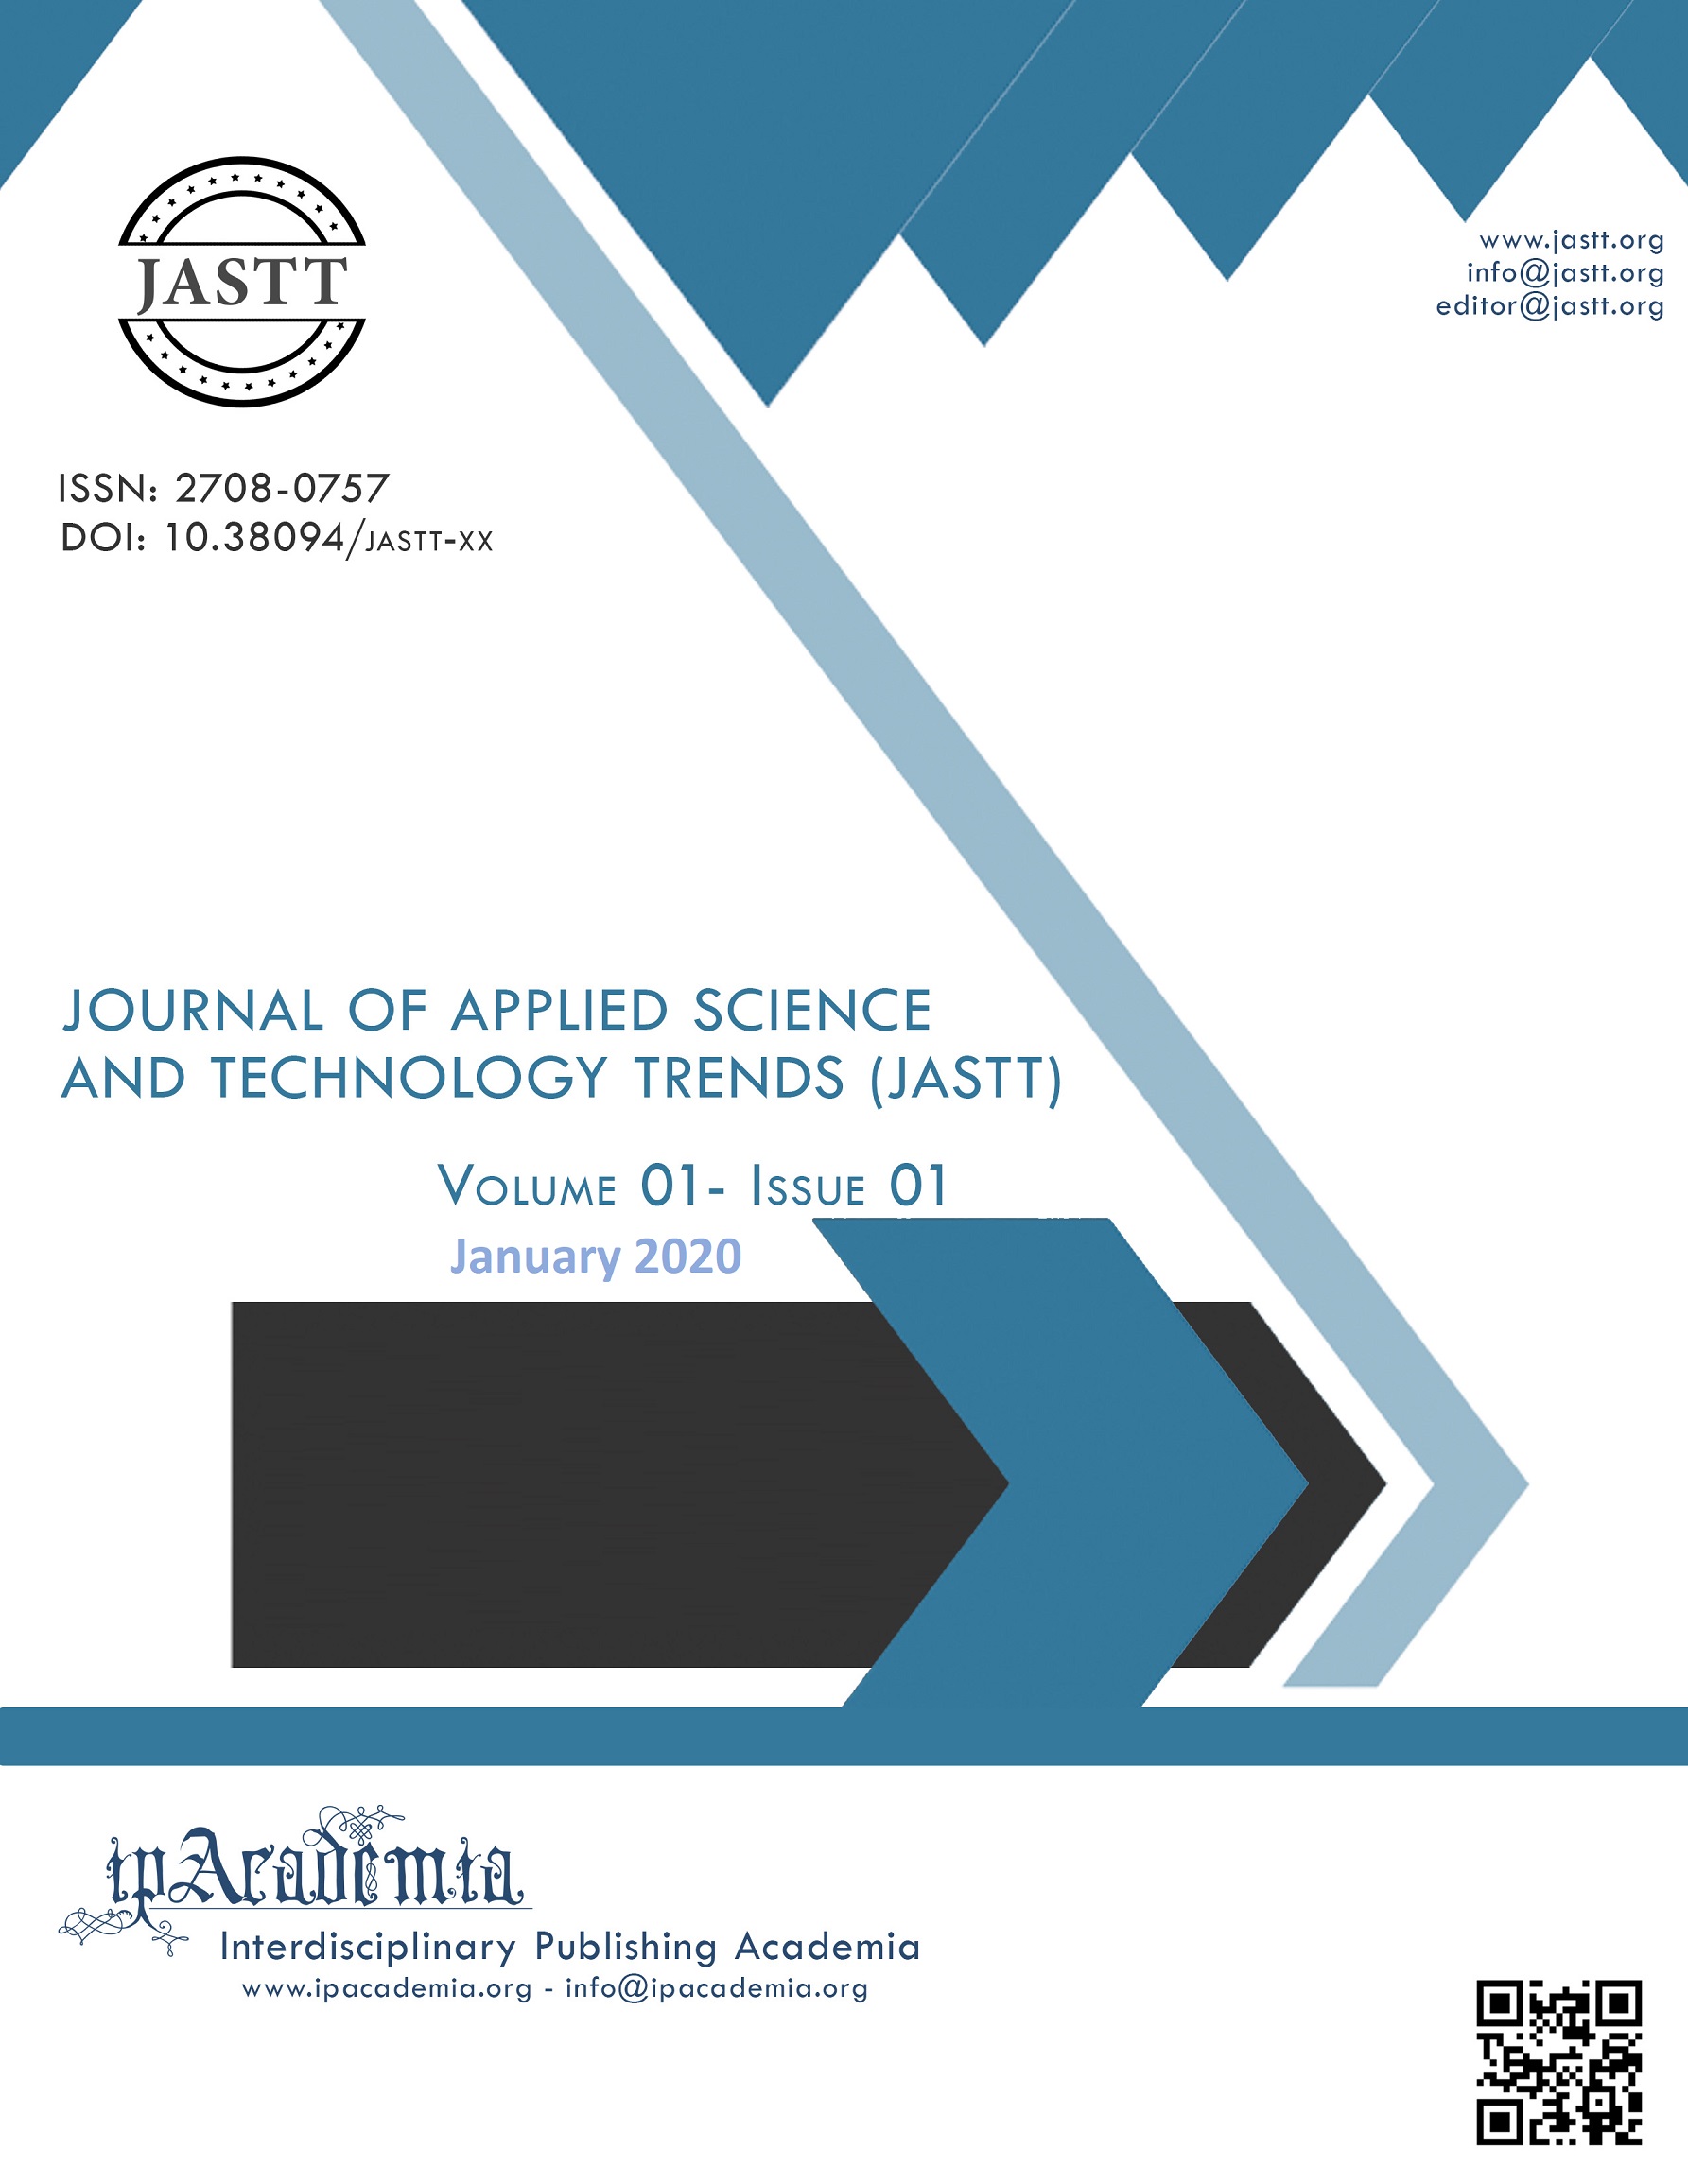 Journal of Applied Science and Technology Trends